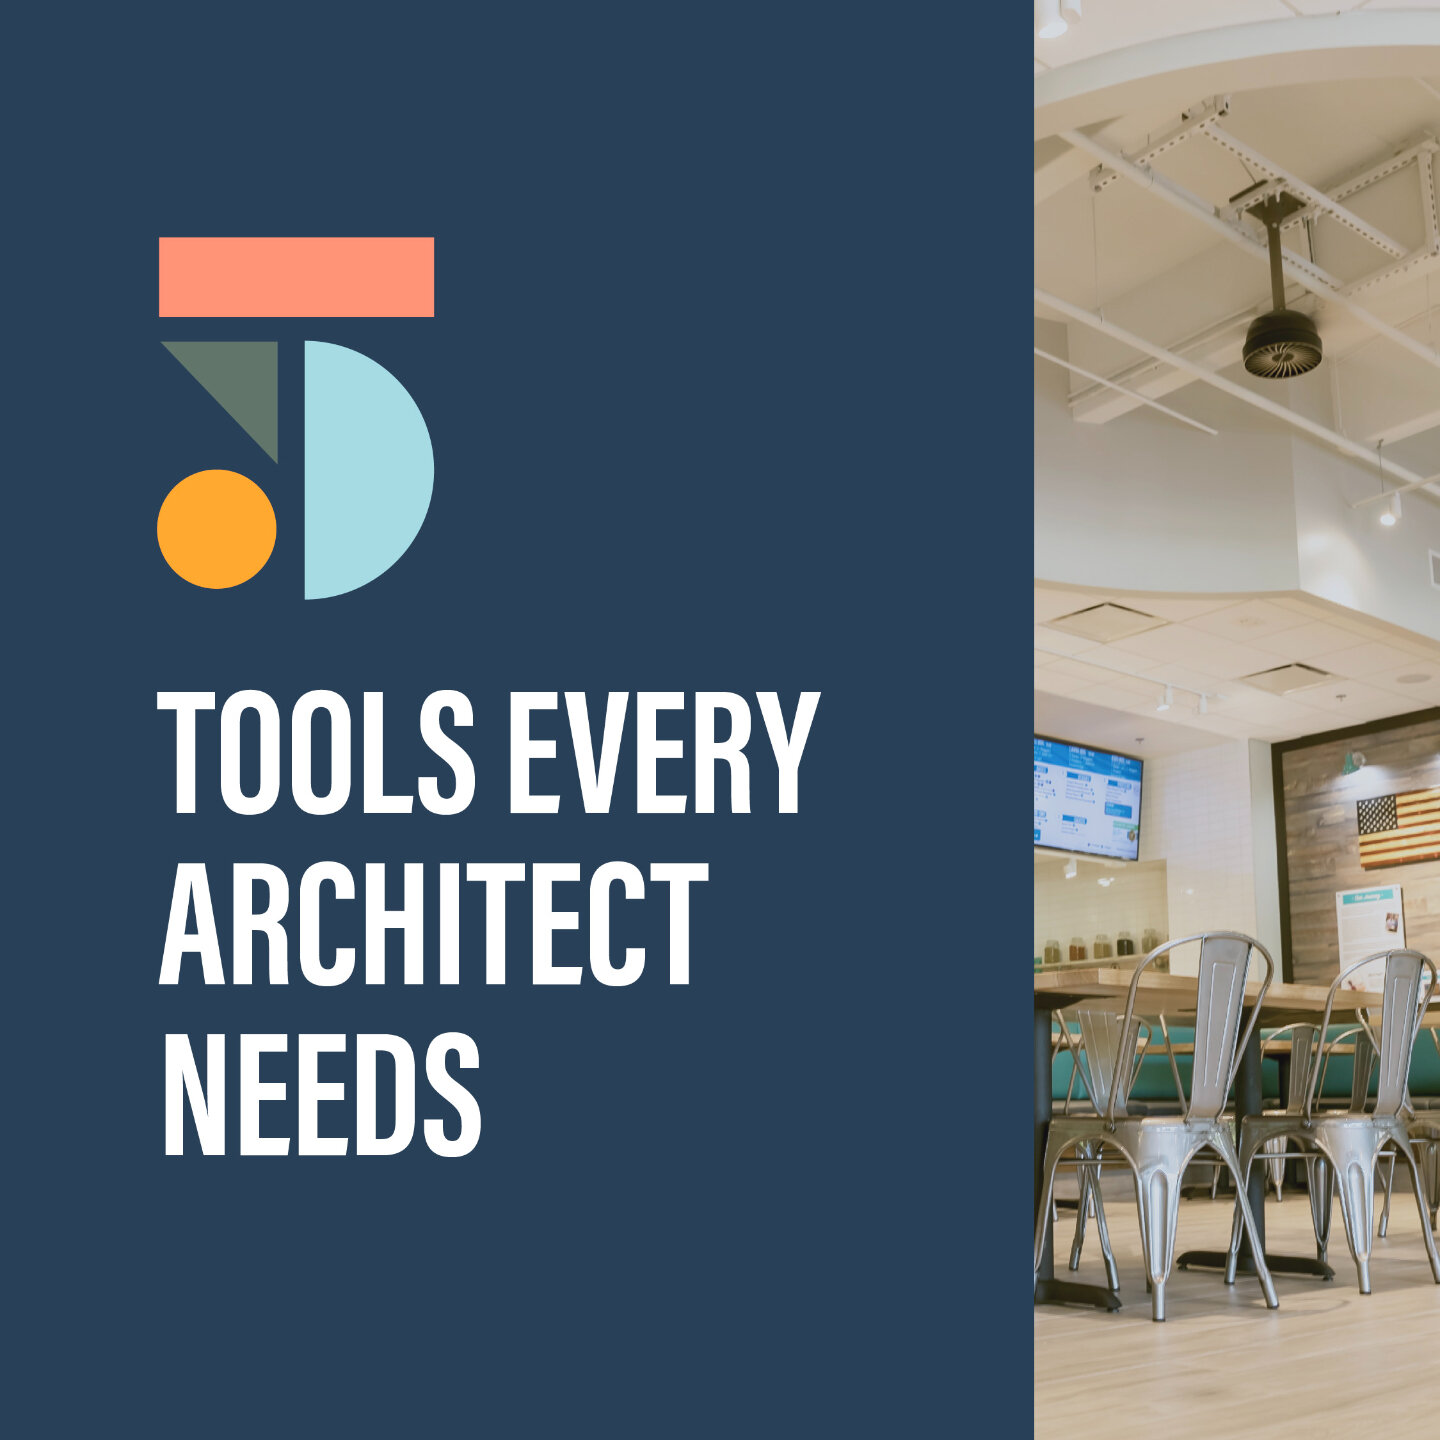 As architects we rely on a wide range of tools to bring our designs to life.

Swipe through to see a few of our MUST-HAVES and let us know what would have made it into your top 5!

@scannedwithcanvas @procoretech

#ArchitectureTools #ArchitecturalDes